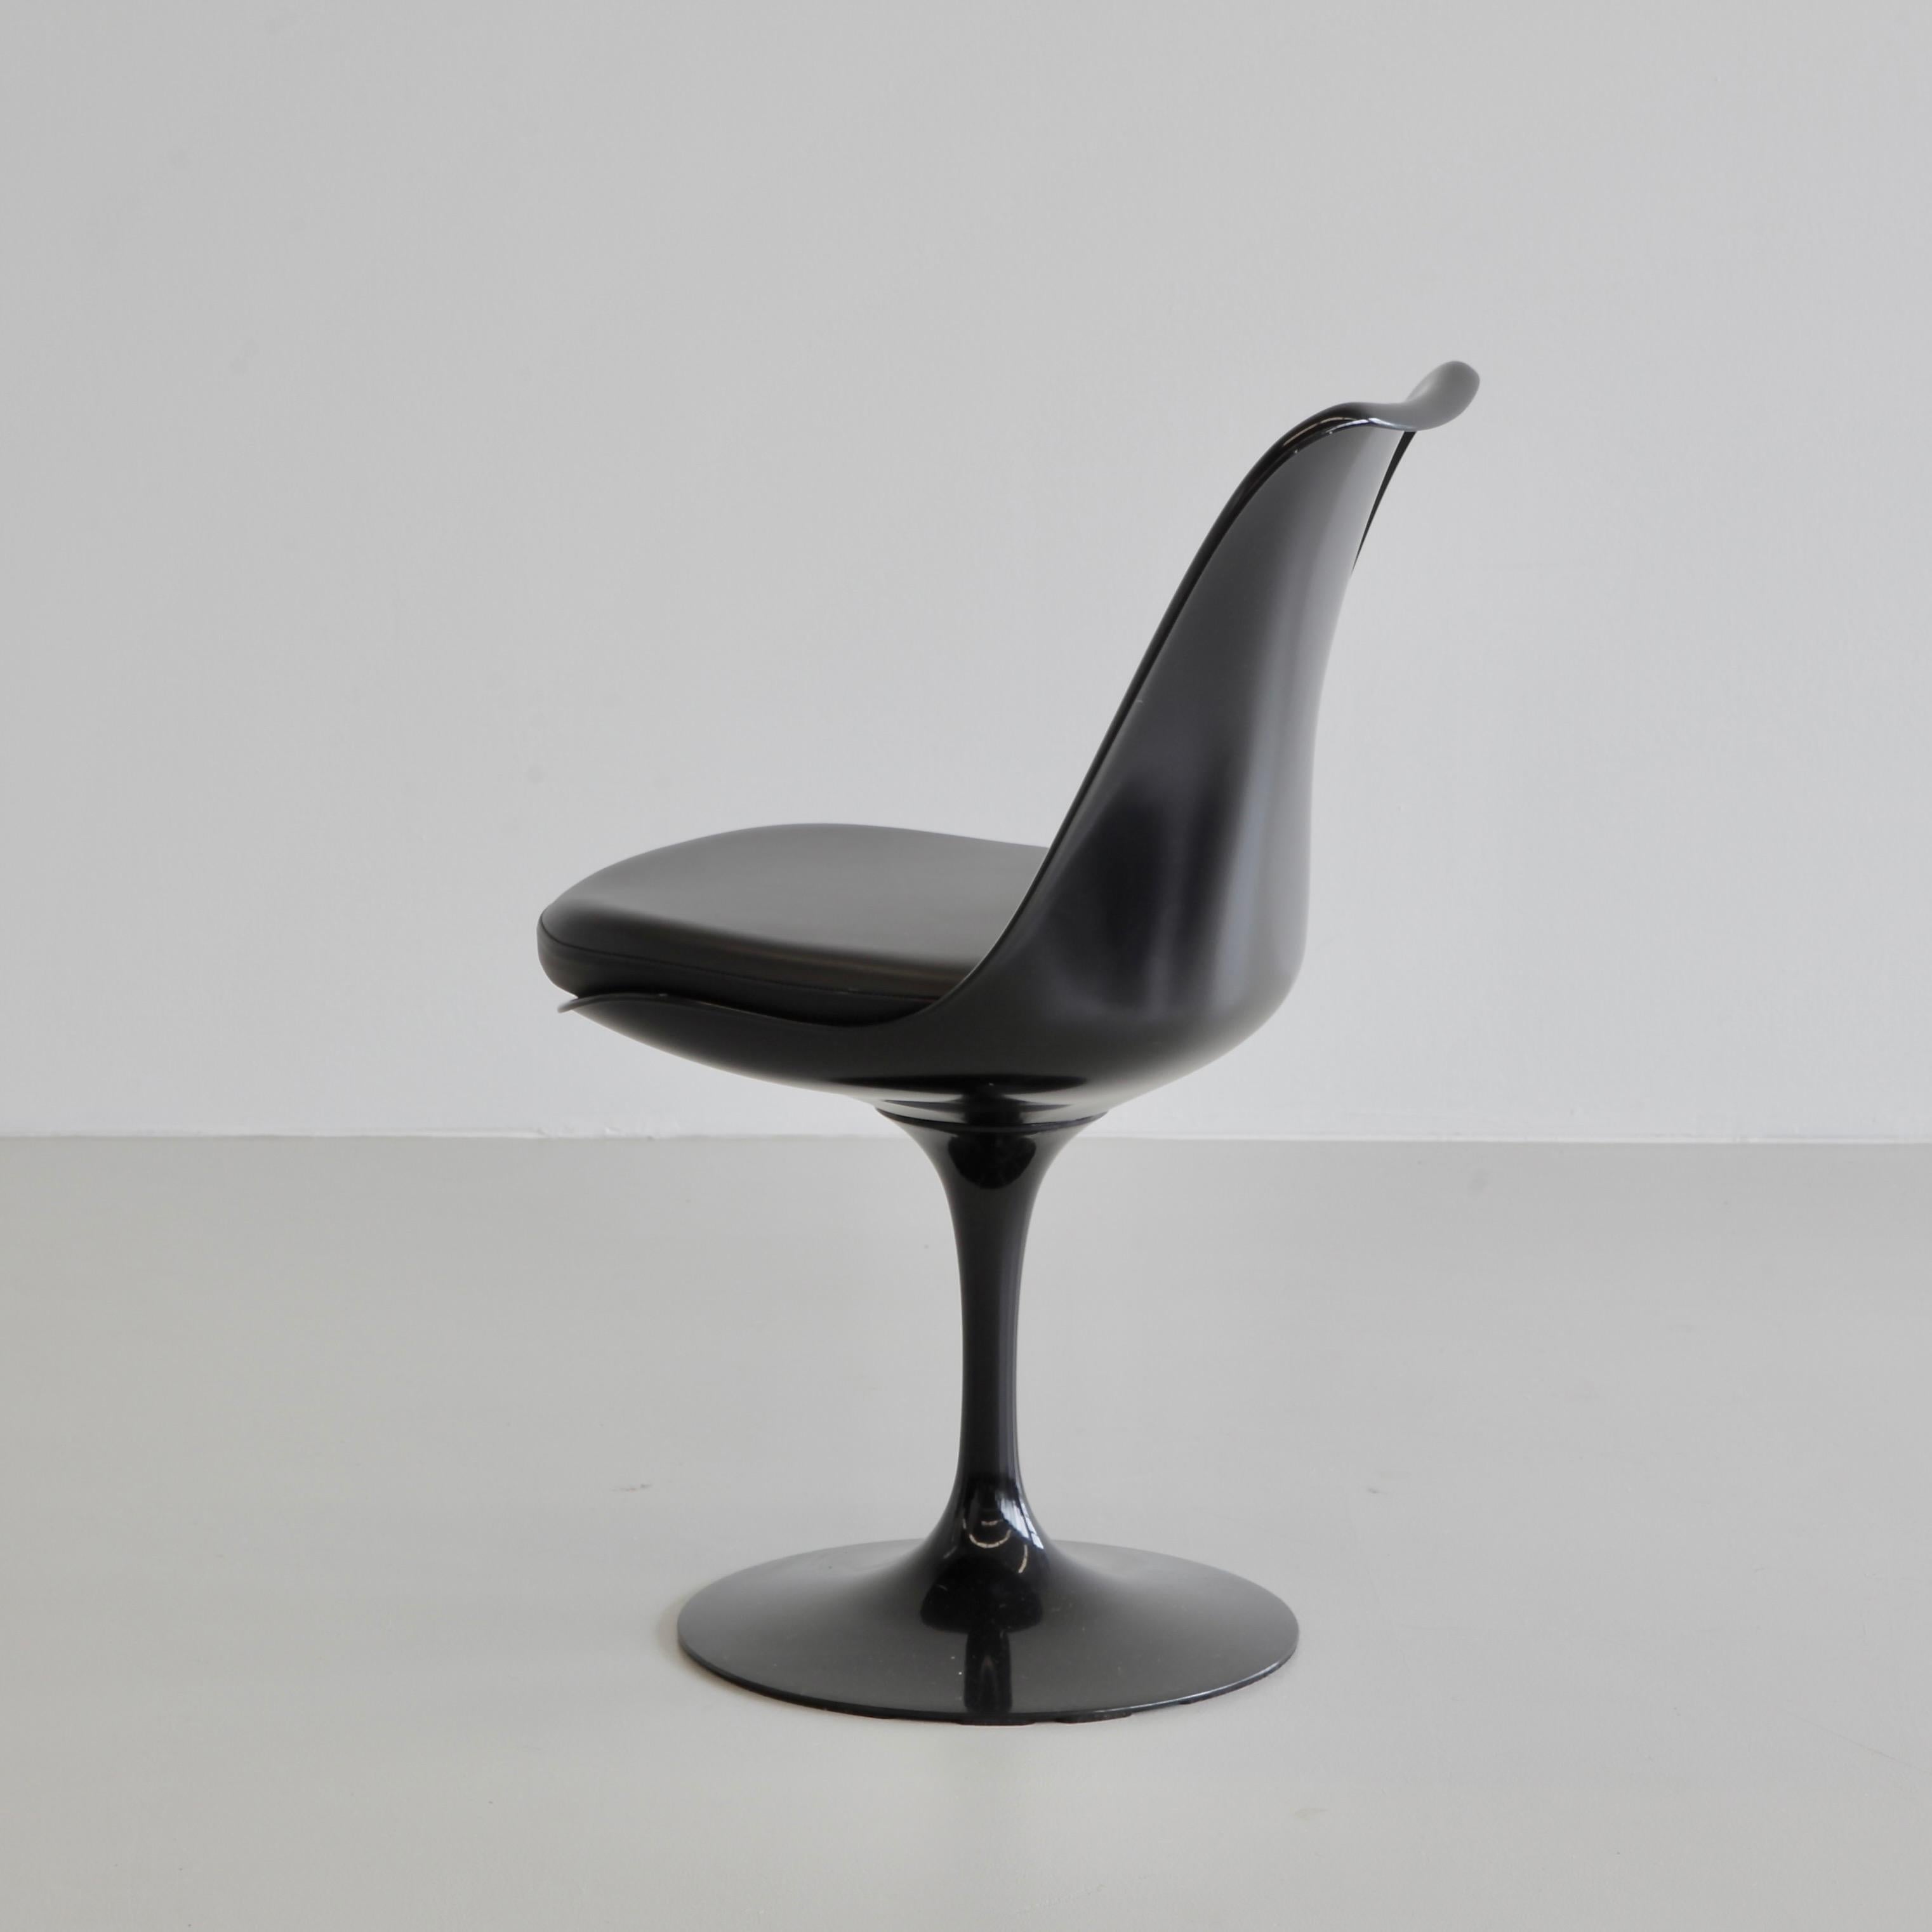 Pair of Tulip chairs designed by Eero Saarinen. U.S.A., Knoll International.

Black cast aluminium tulip bases with swivel seats. Original early 21st century chairs with 'Knoll Studio' metal logo underside of the base. Black leatherette seat